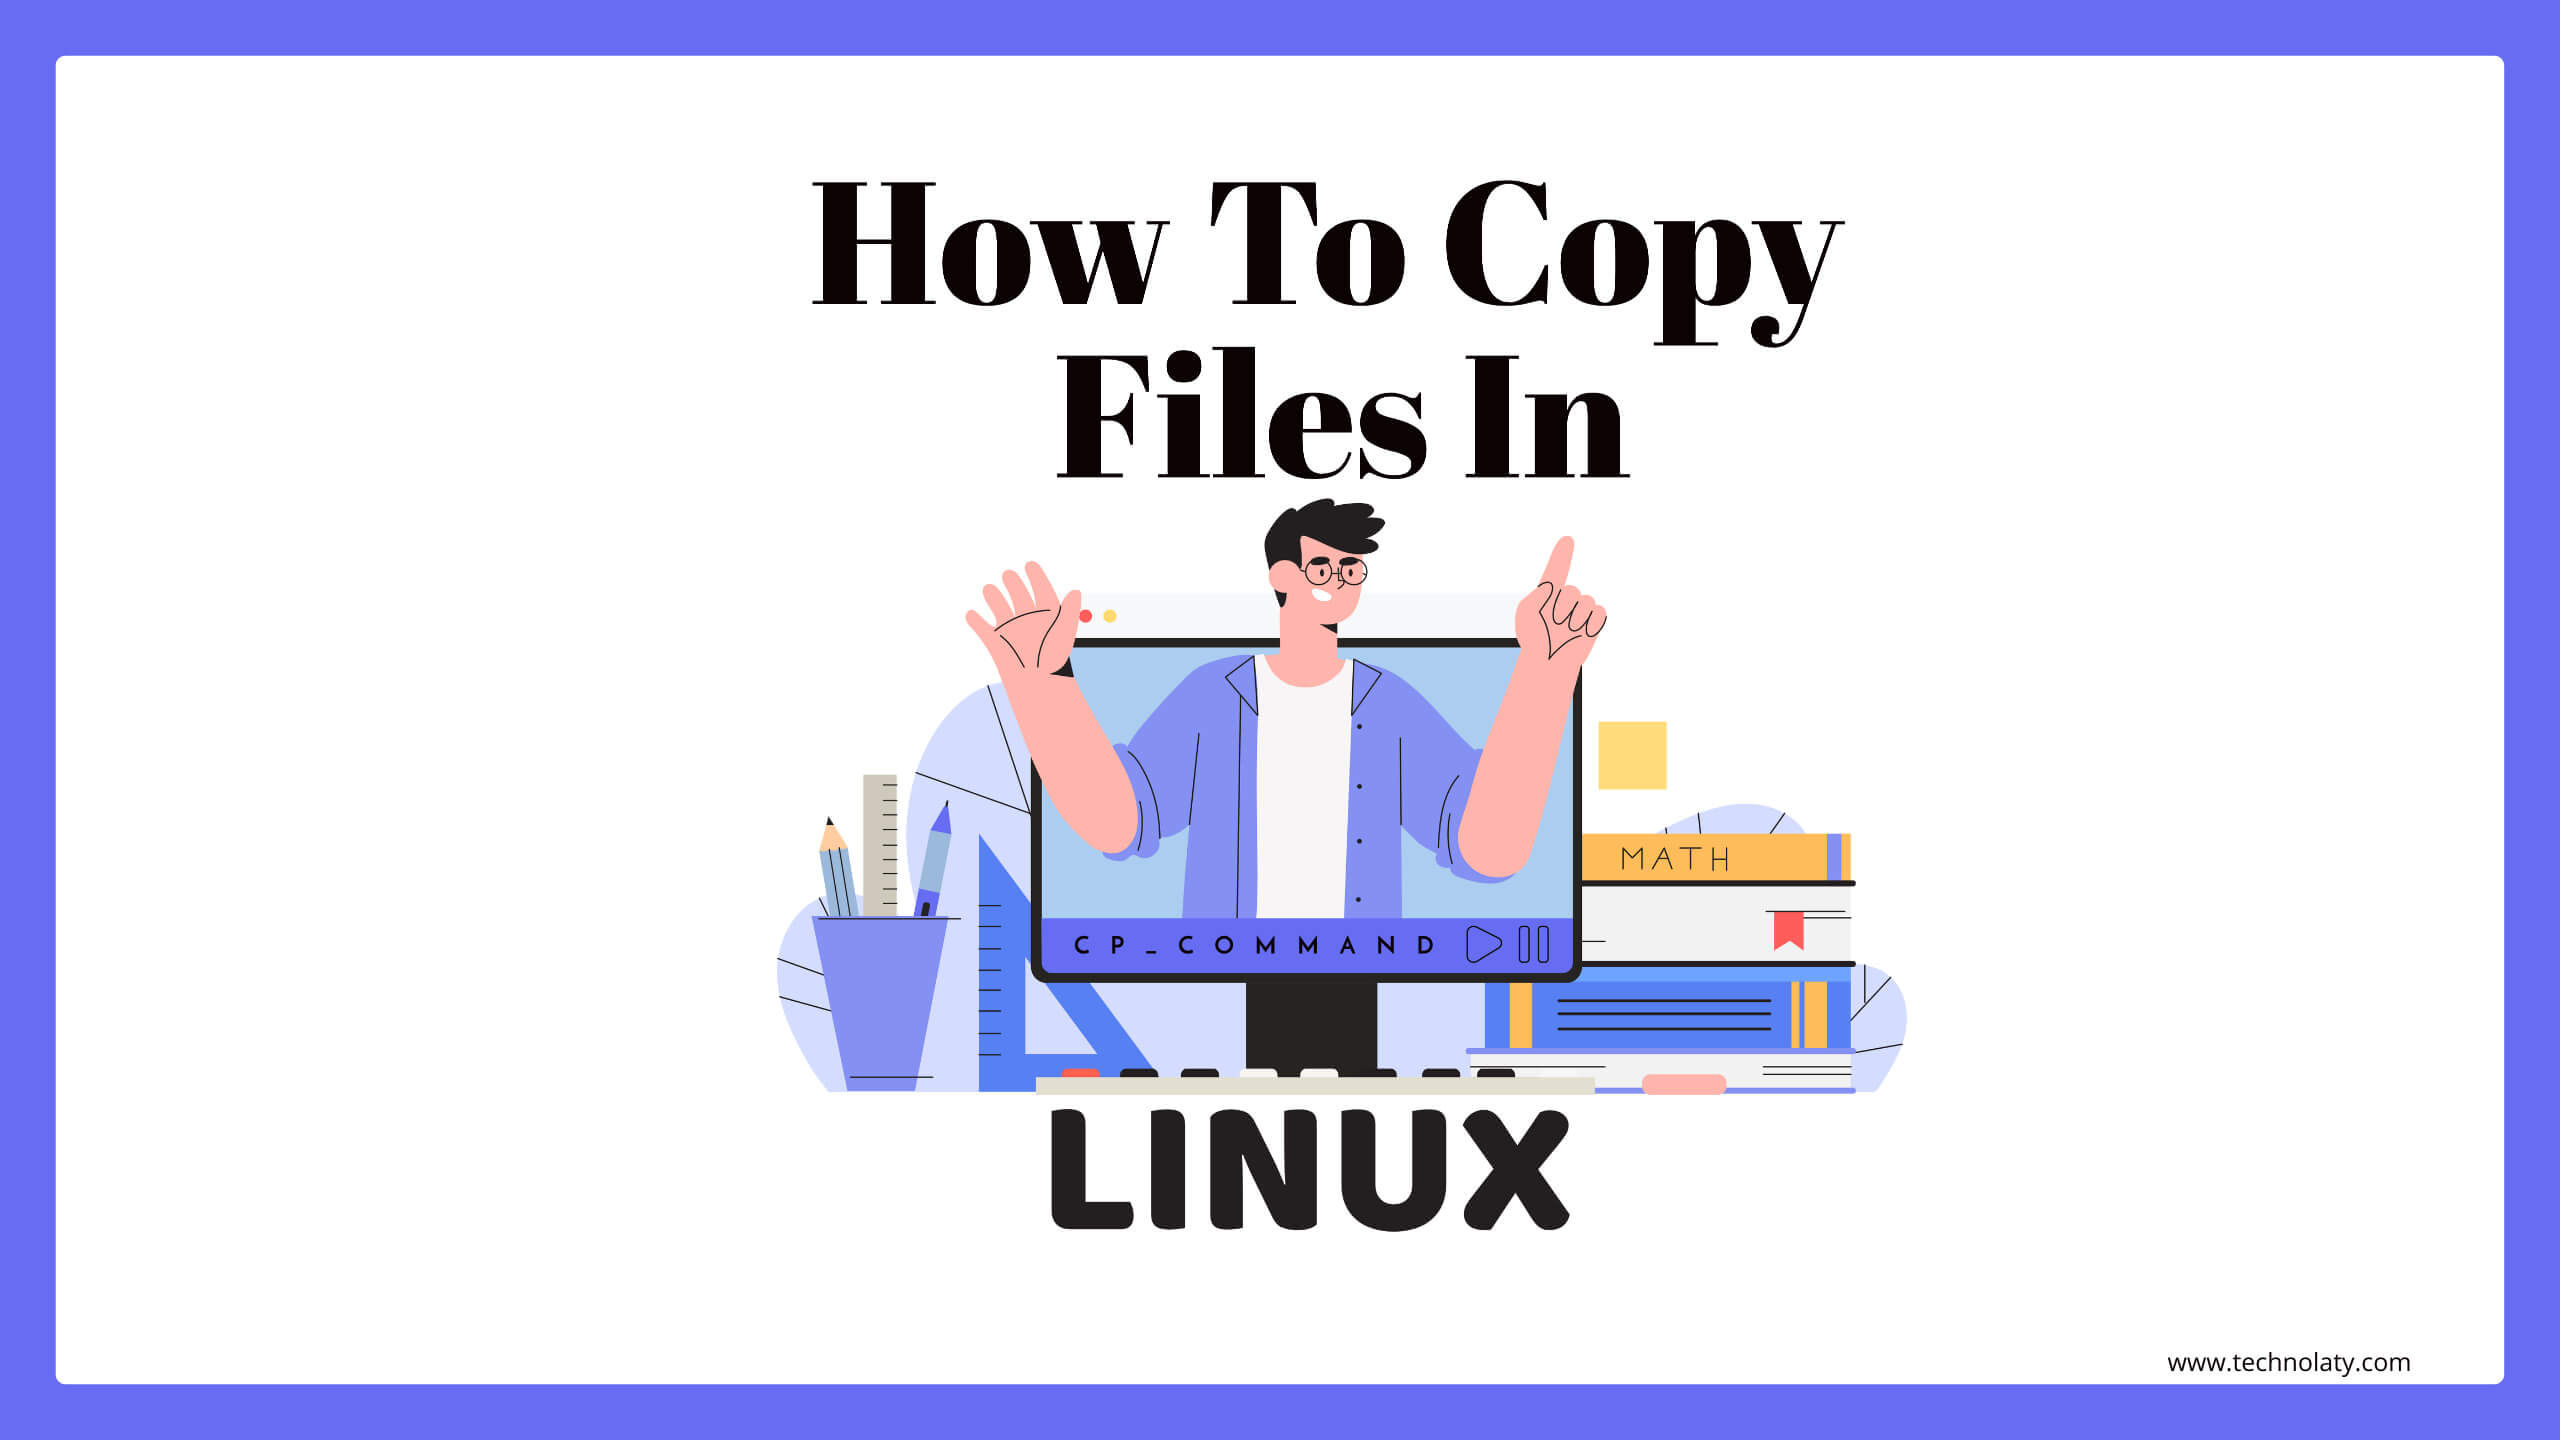 Command to copy files in Linux